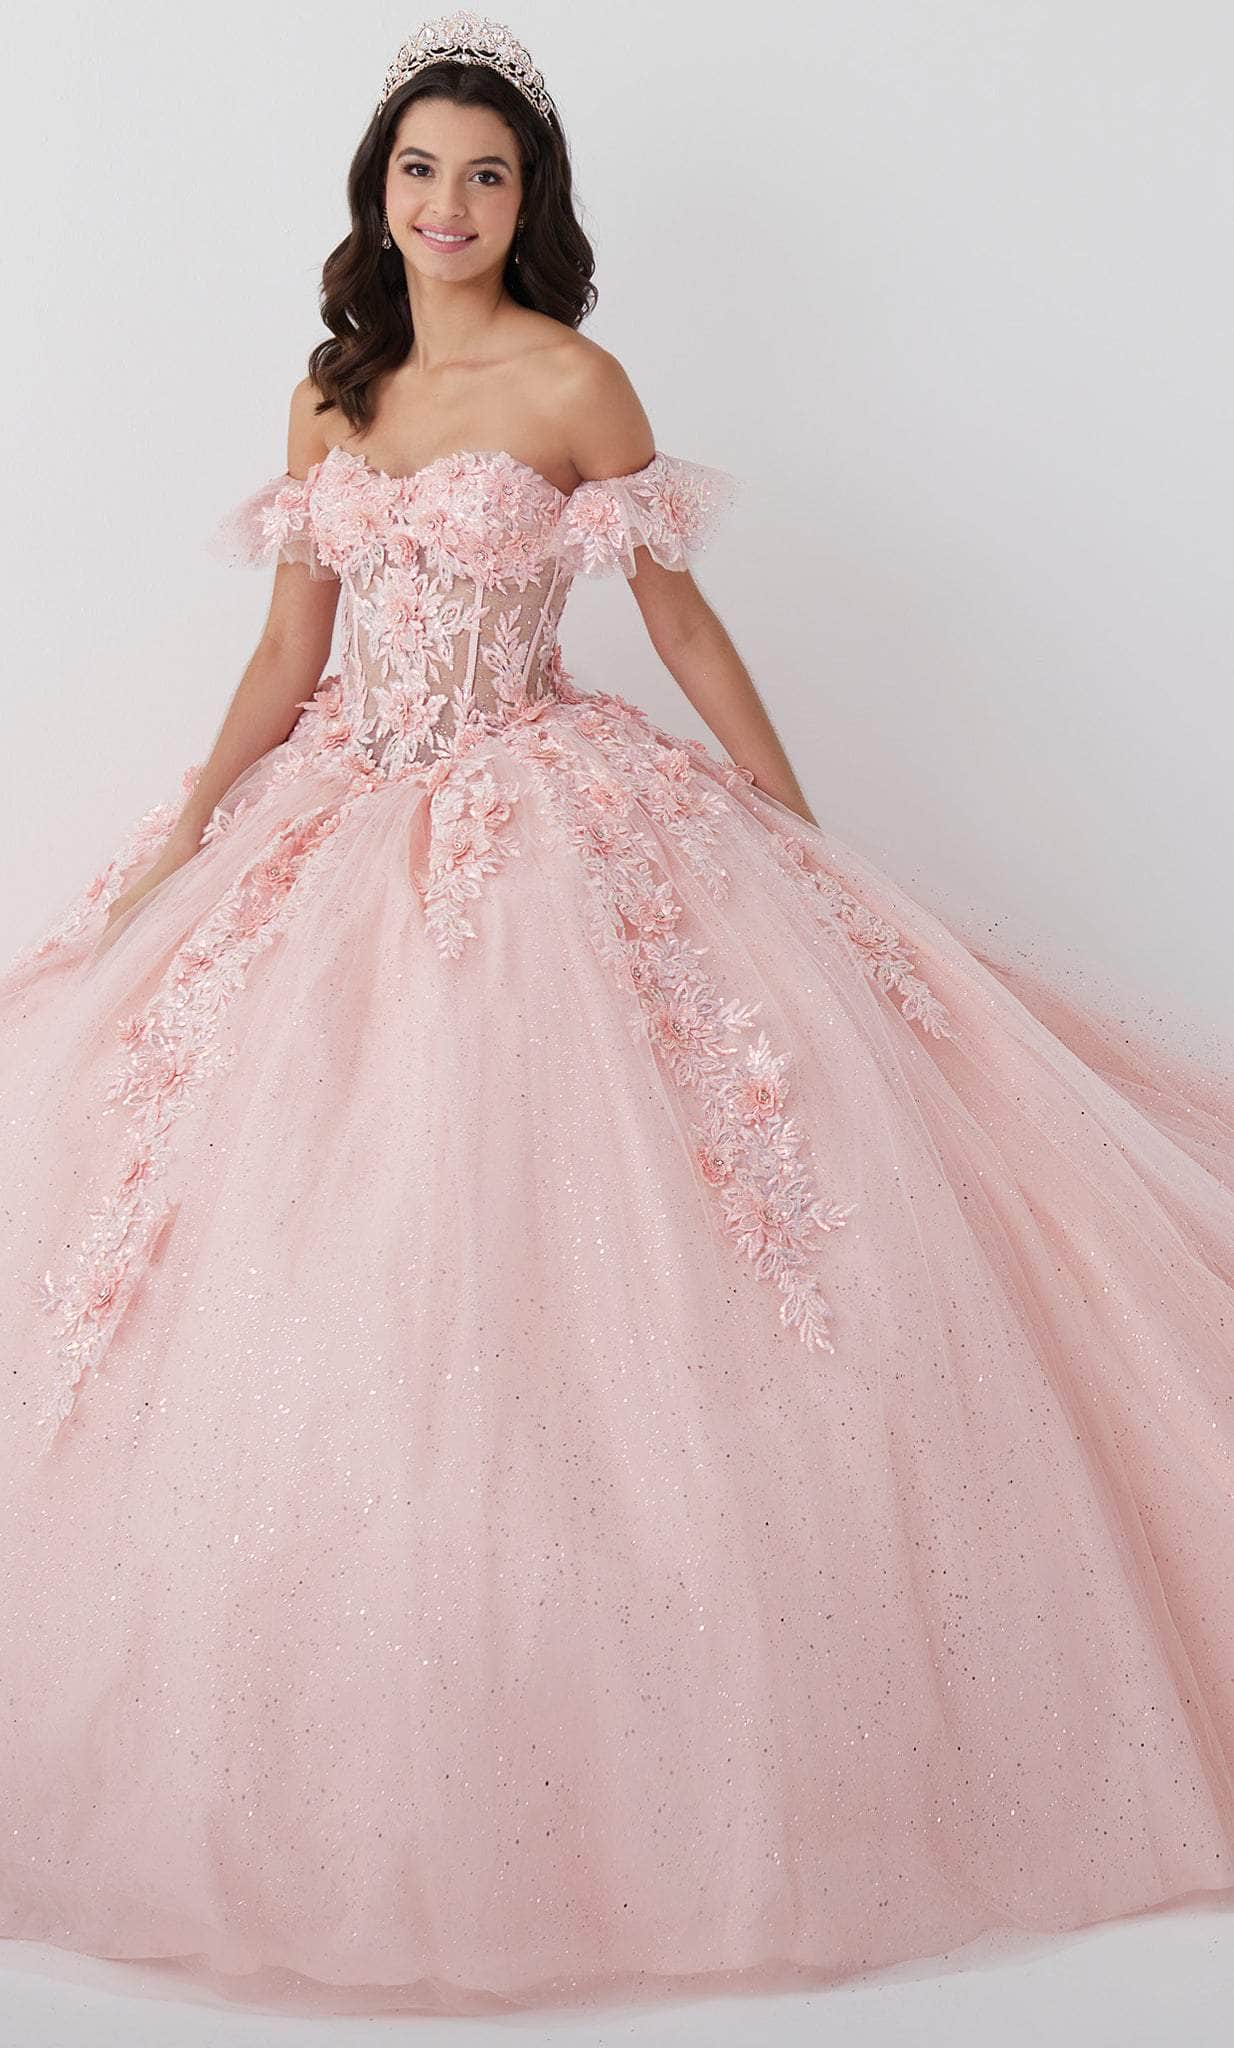 Image of Fiesta Gowns 56465 - Strapless Corseted Quinceanera Gown